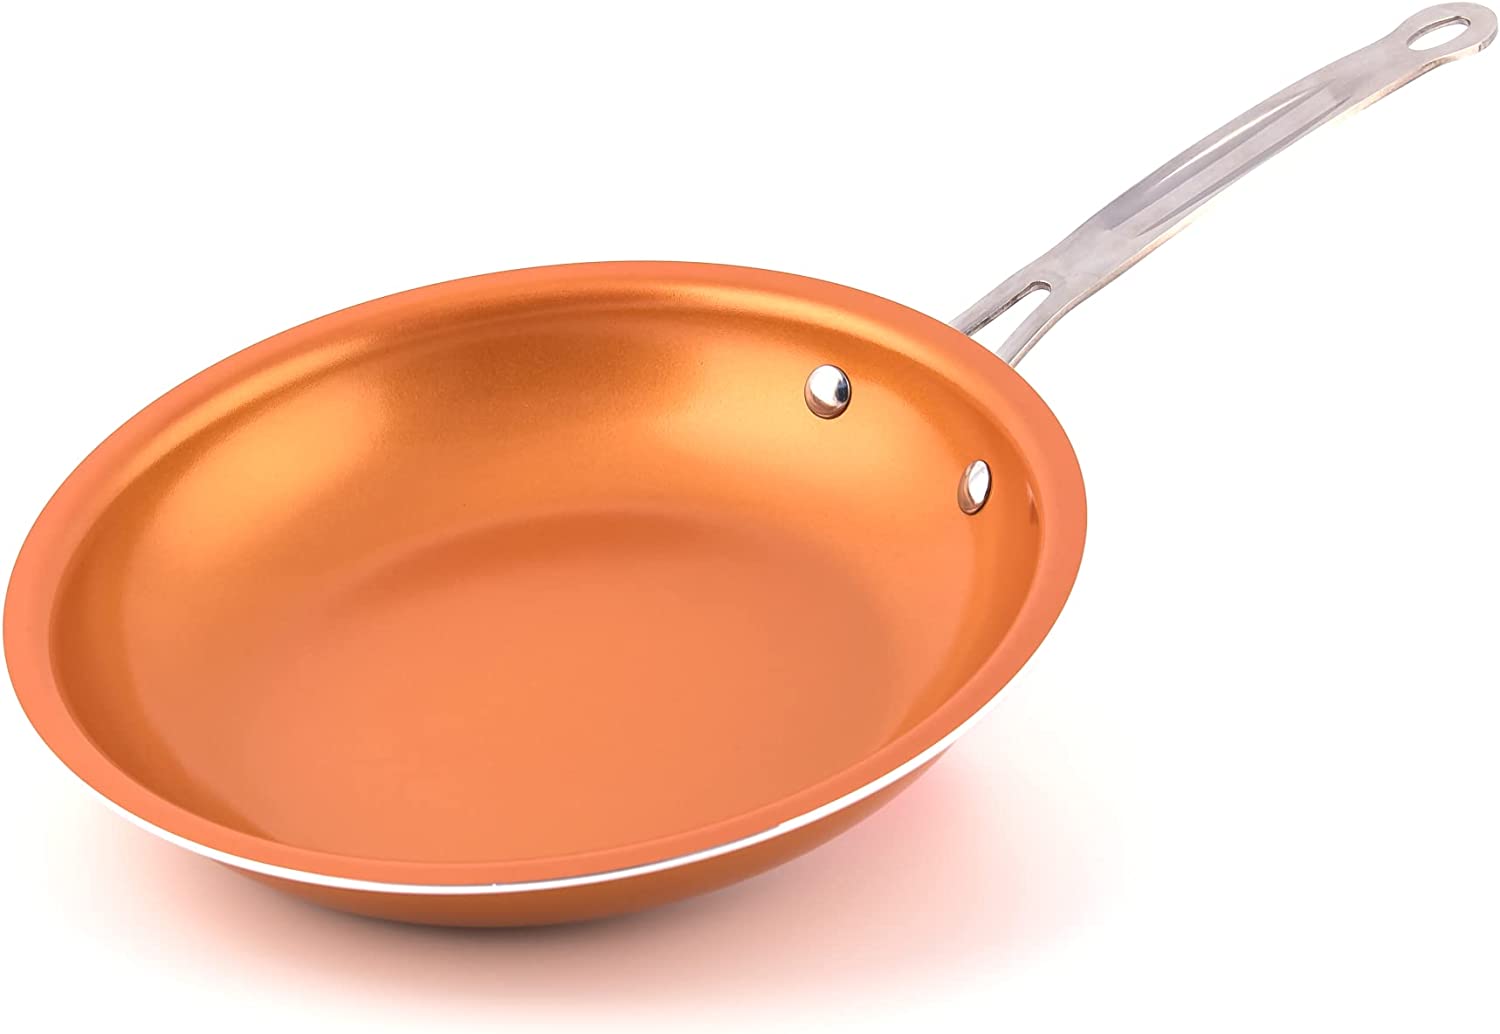 MasterPan Thermally-Efficient Anti-Scratch Copper Pan, 10-Inch